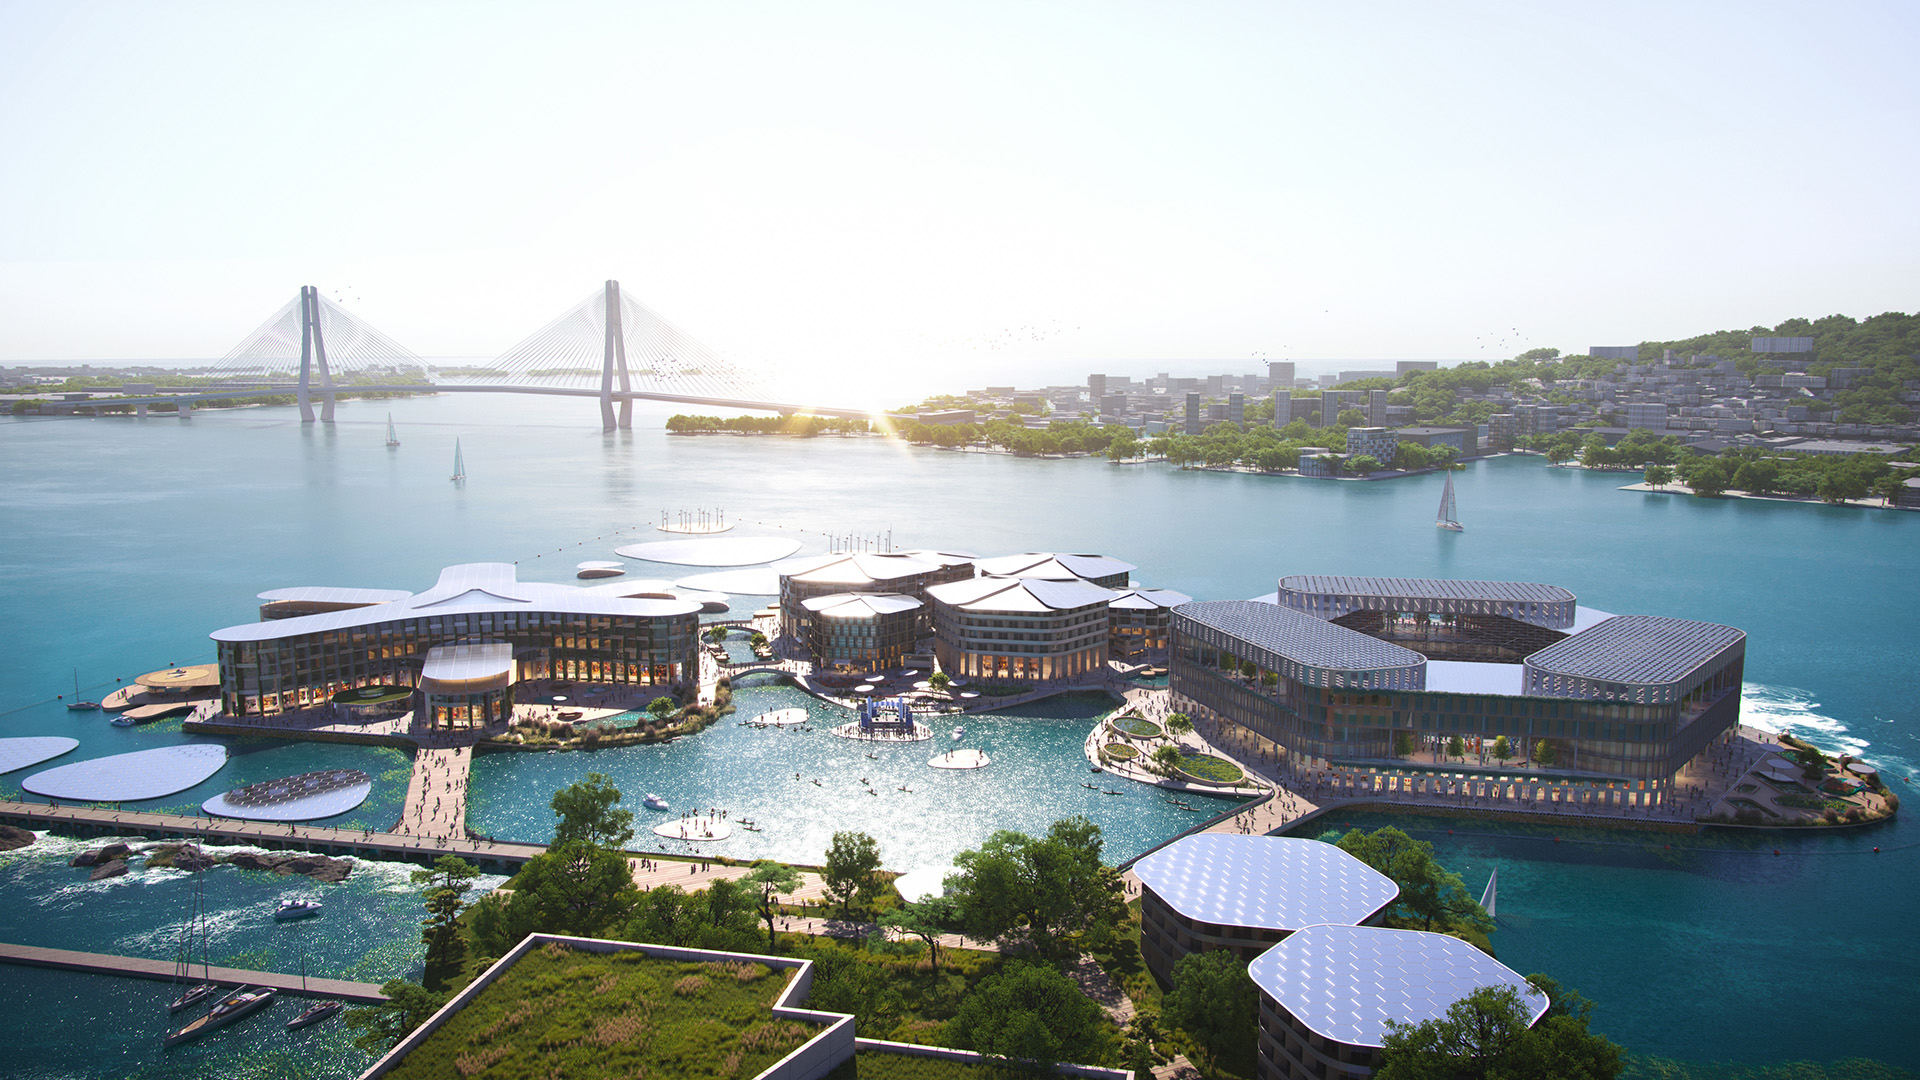 OCEANIX Busan is the world’s first prototype of a resilient and sustainable floating community © OCEANIX/BIG-Bjarke Ingels Group